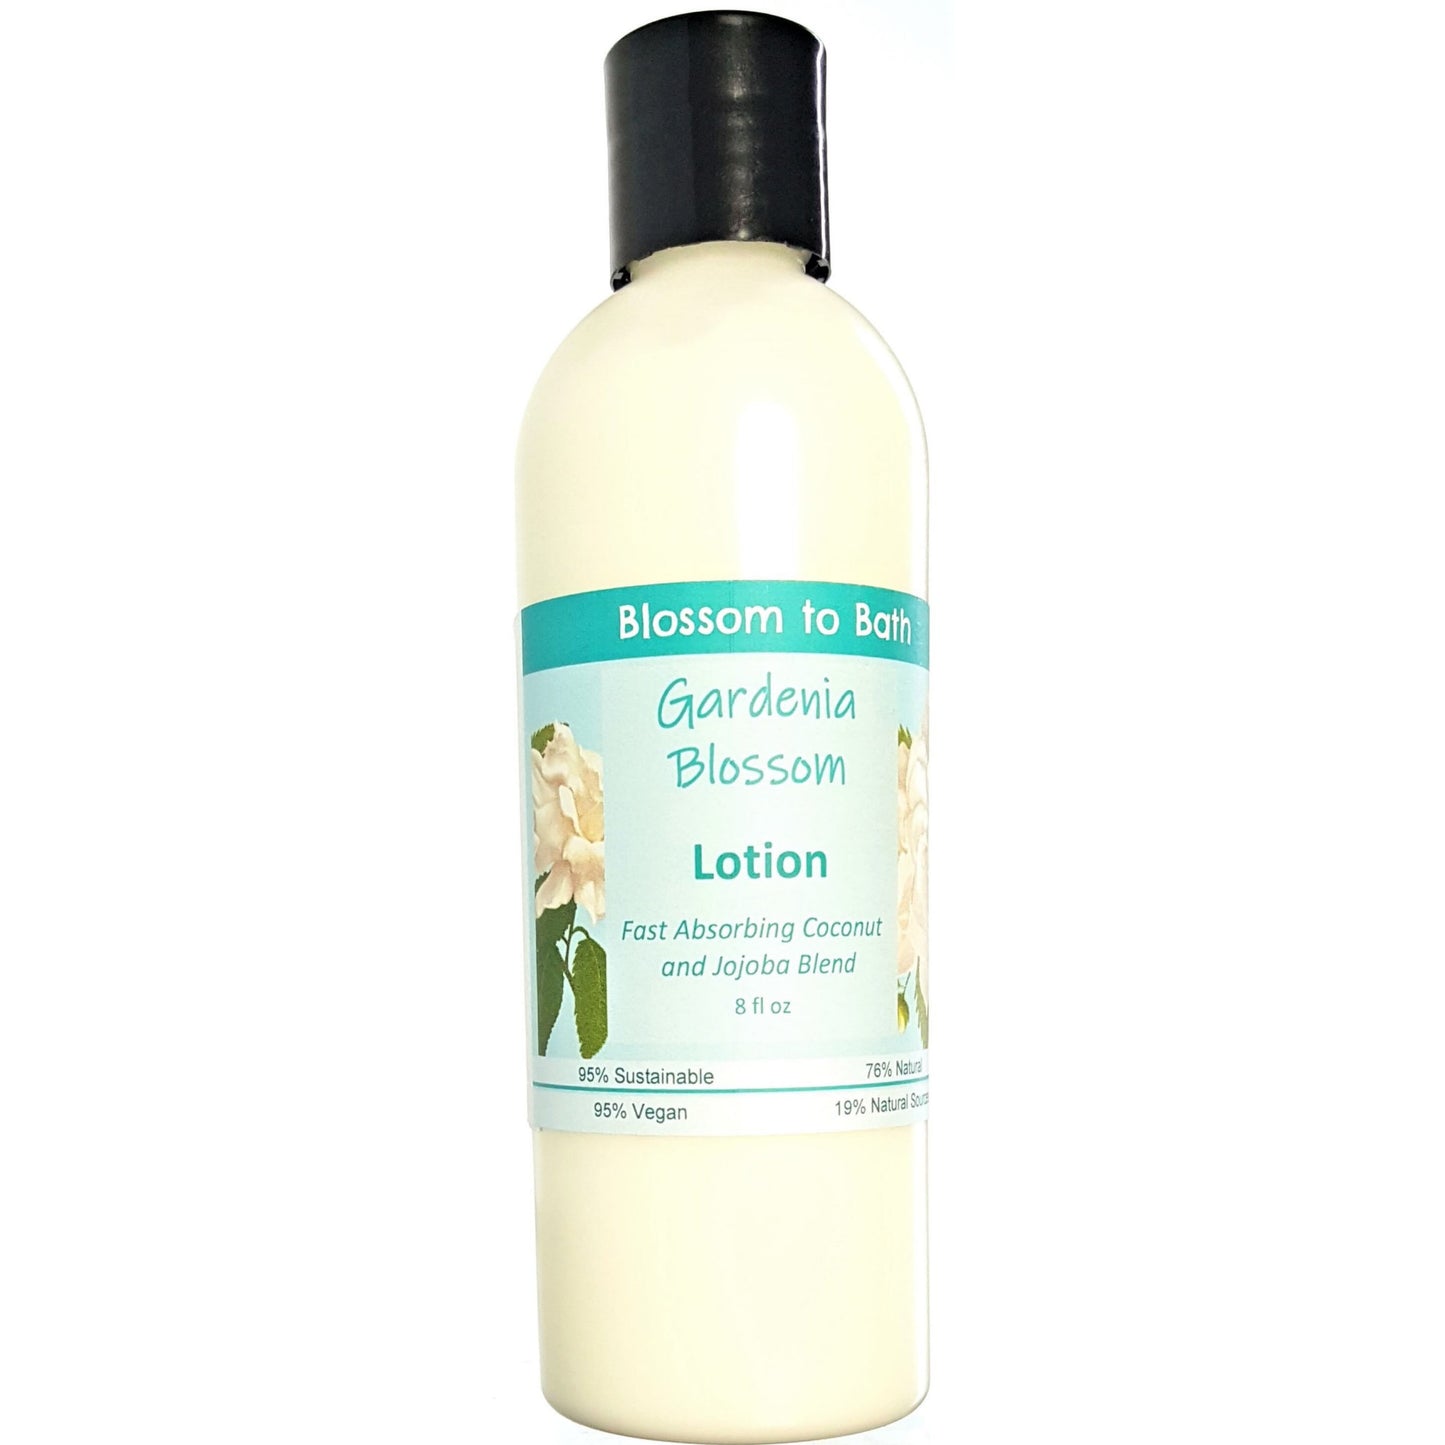 Buy Blossom to Bath Gardenia Blossom Lotion from Flowersong Soap Studio.  Daily moisture  that soaks in quickly made with organic oils and butters that soften and smooth the skin  Sweet Gardenia in a puff of blooming summer flowers